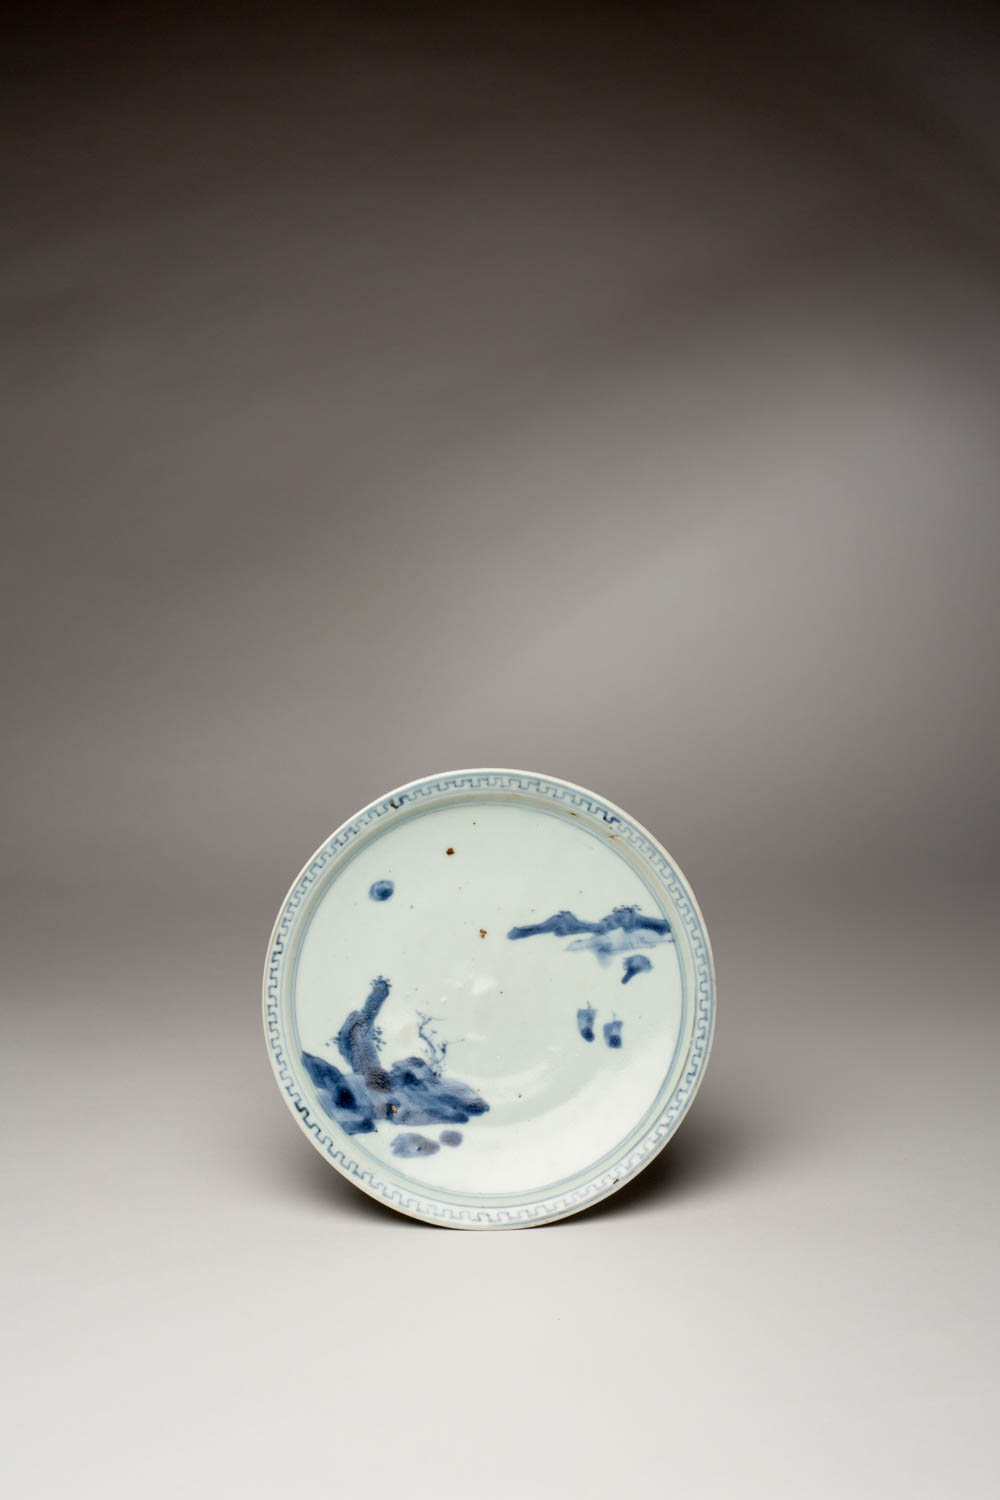 A RARE JAPANESE SHOKI IMARI DISH EDO PERIOD, C.1640-50 With an everted rim, the well decorated in